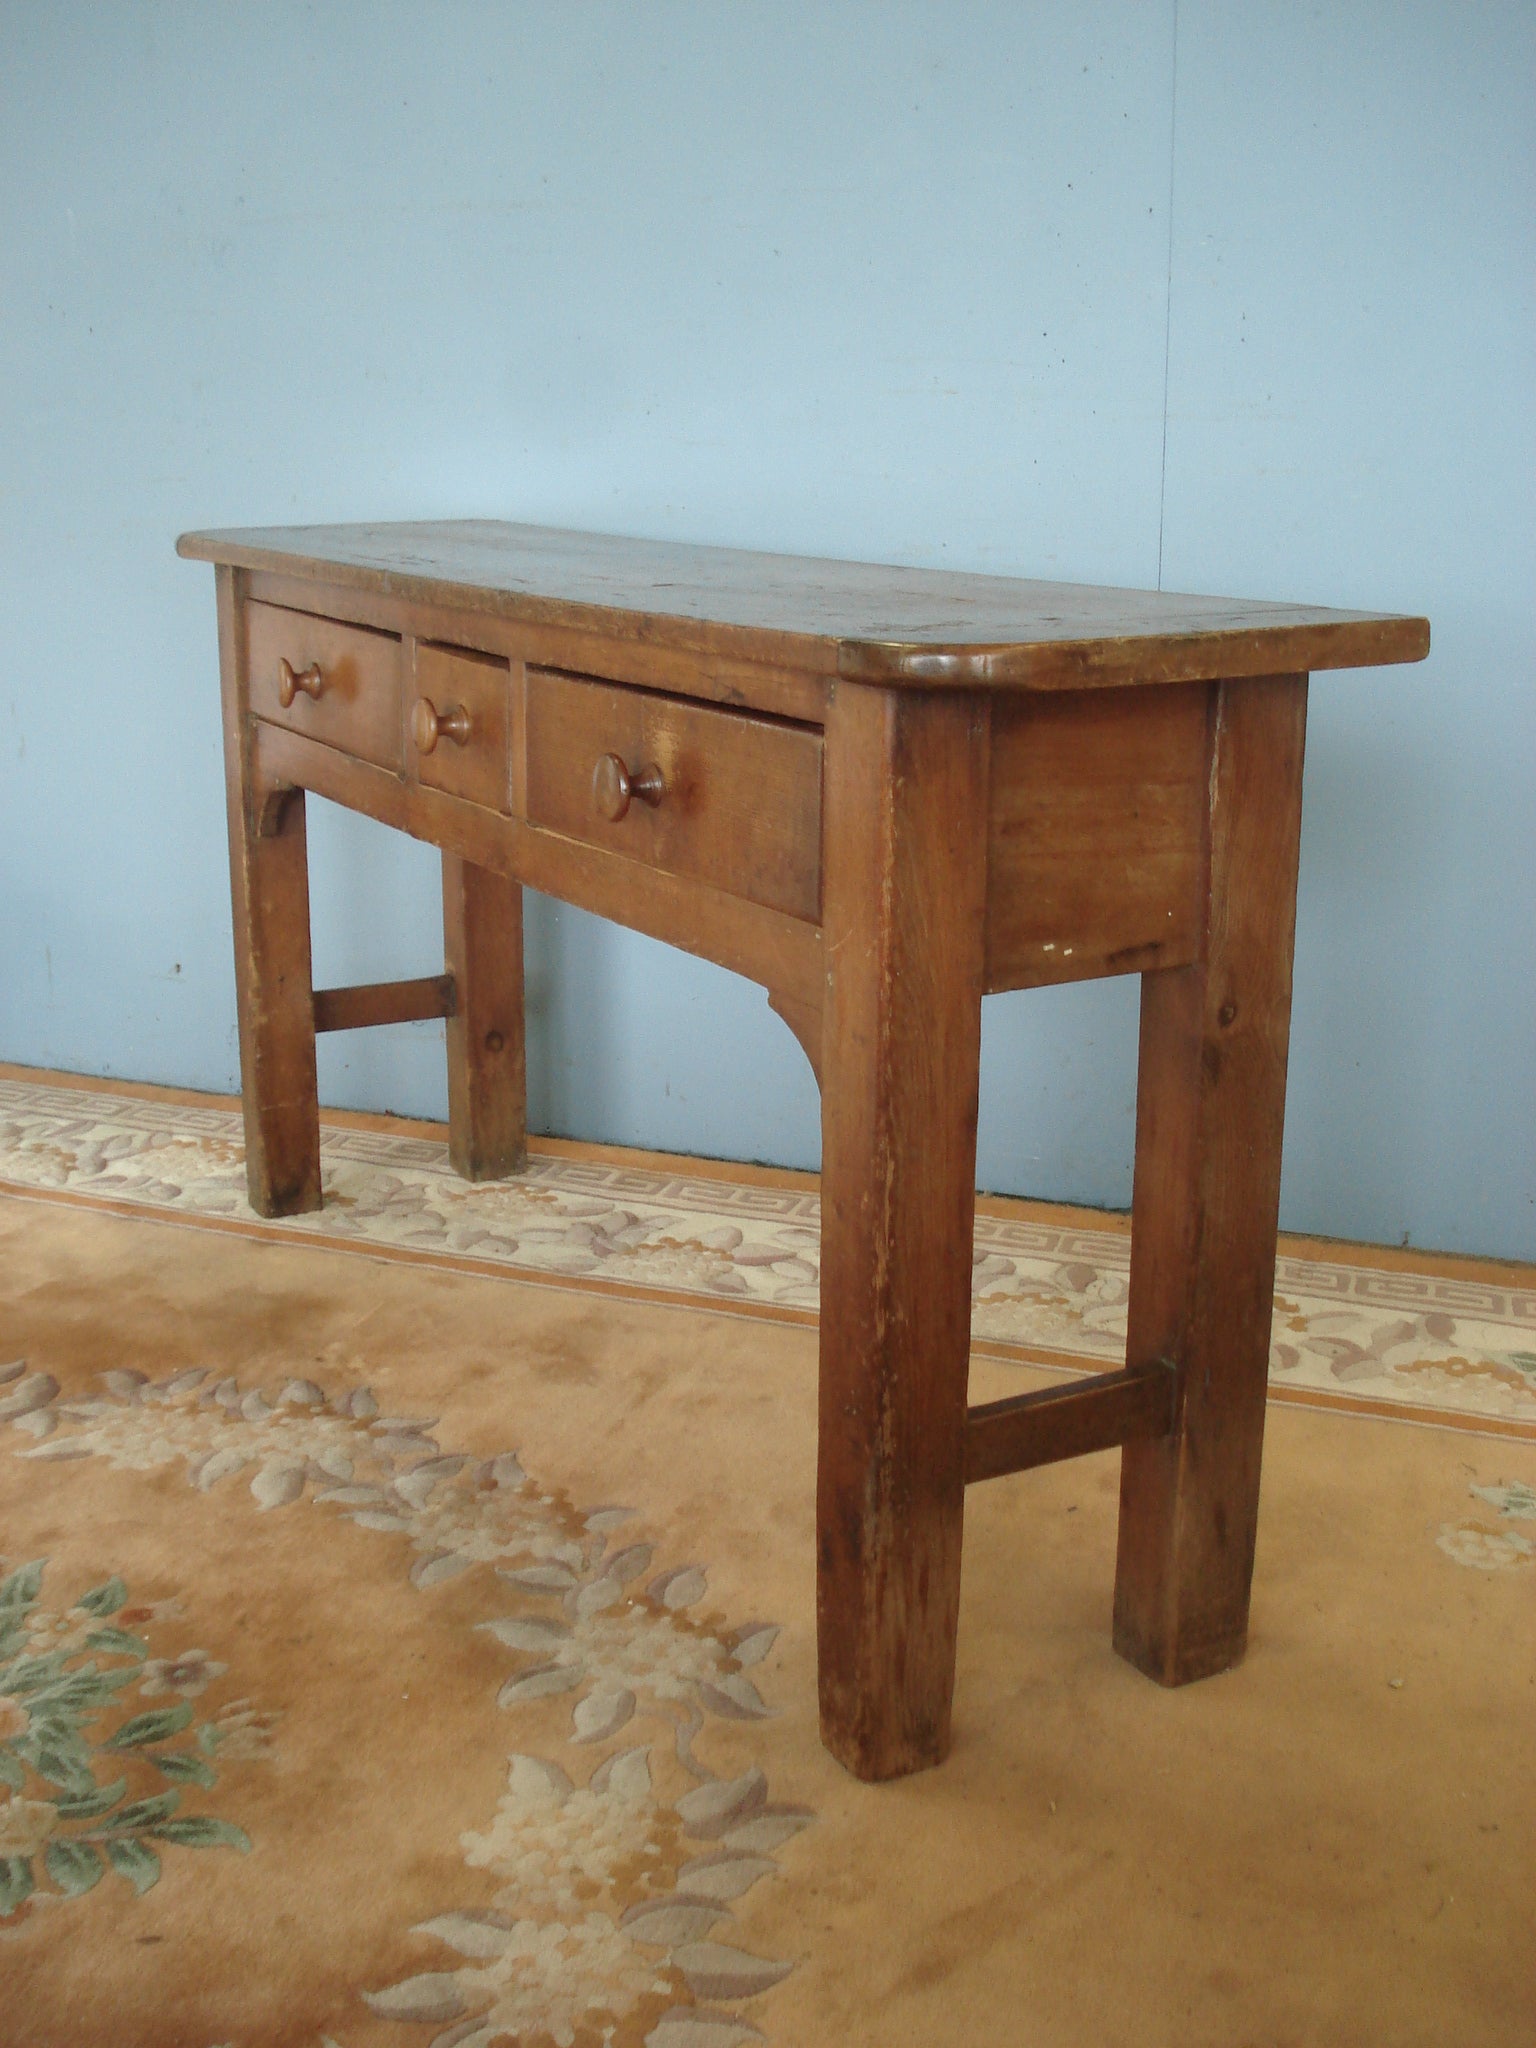 In its original finish:  A shallow 19th century dresser base / console table